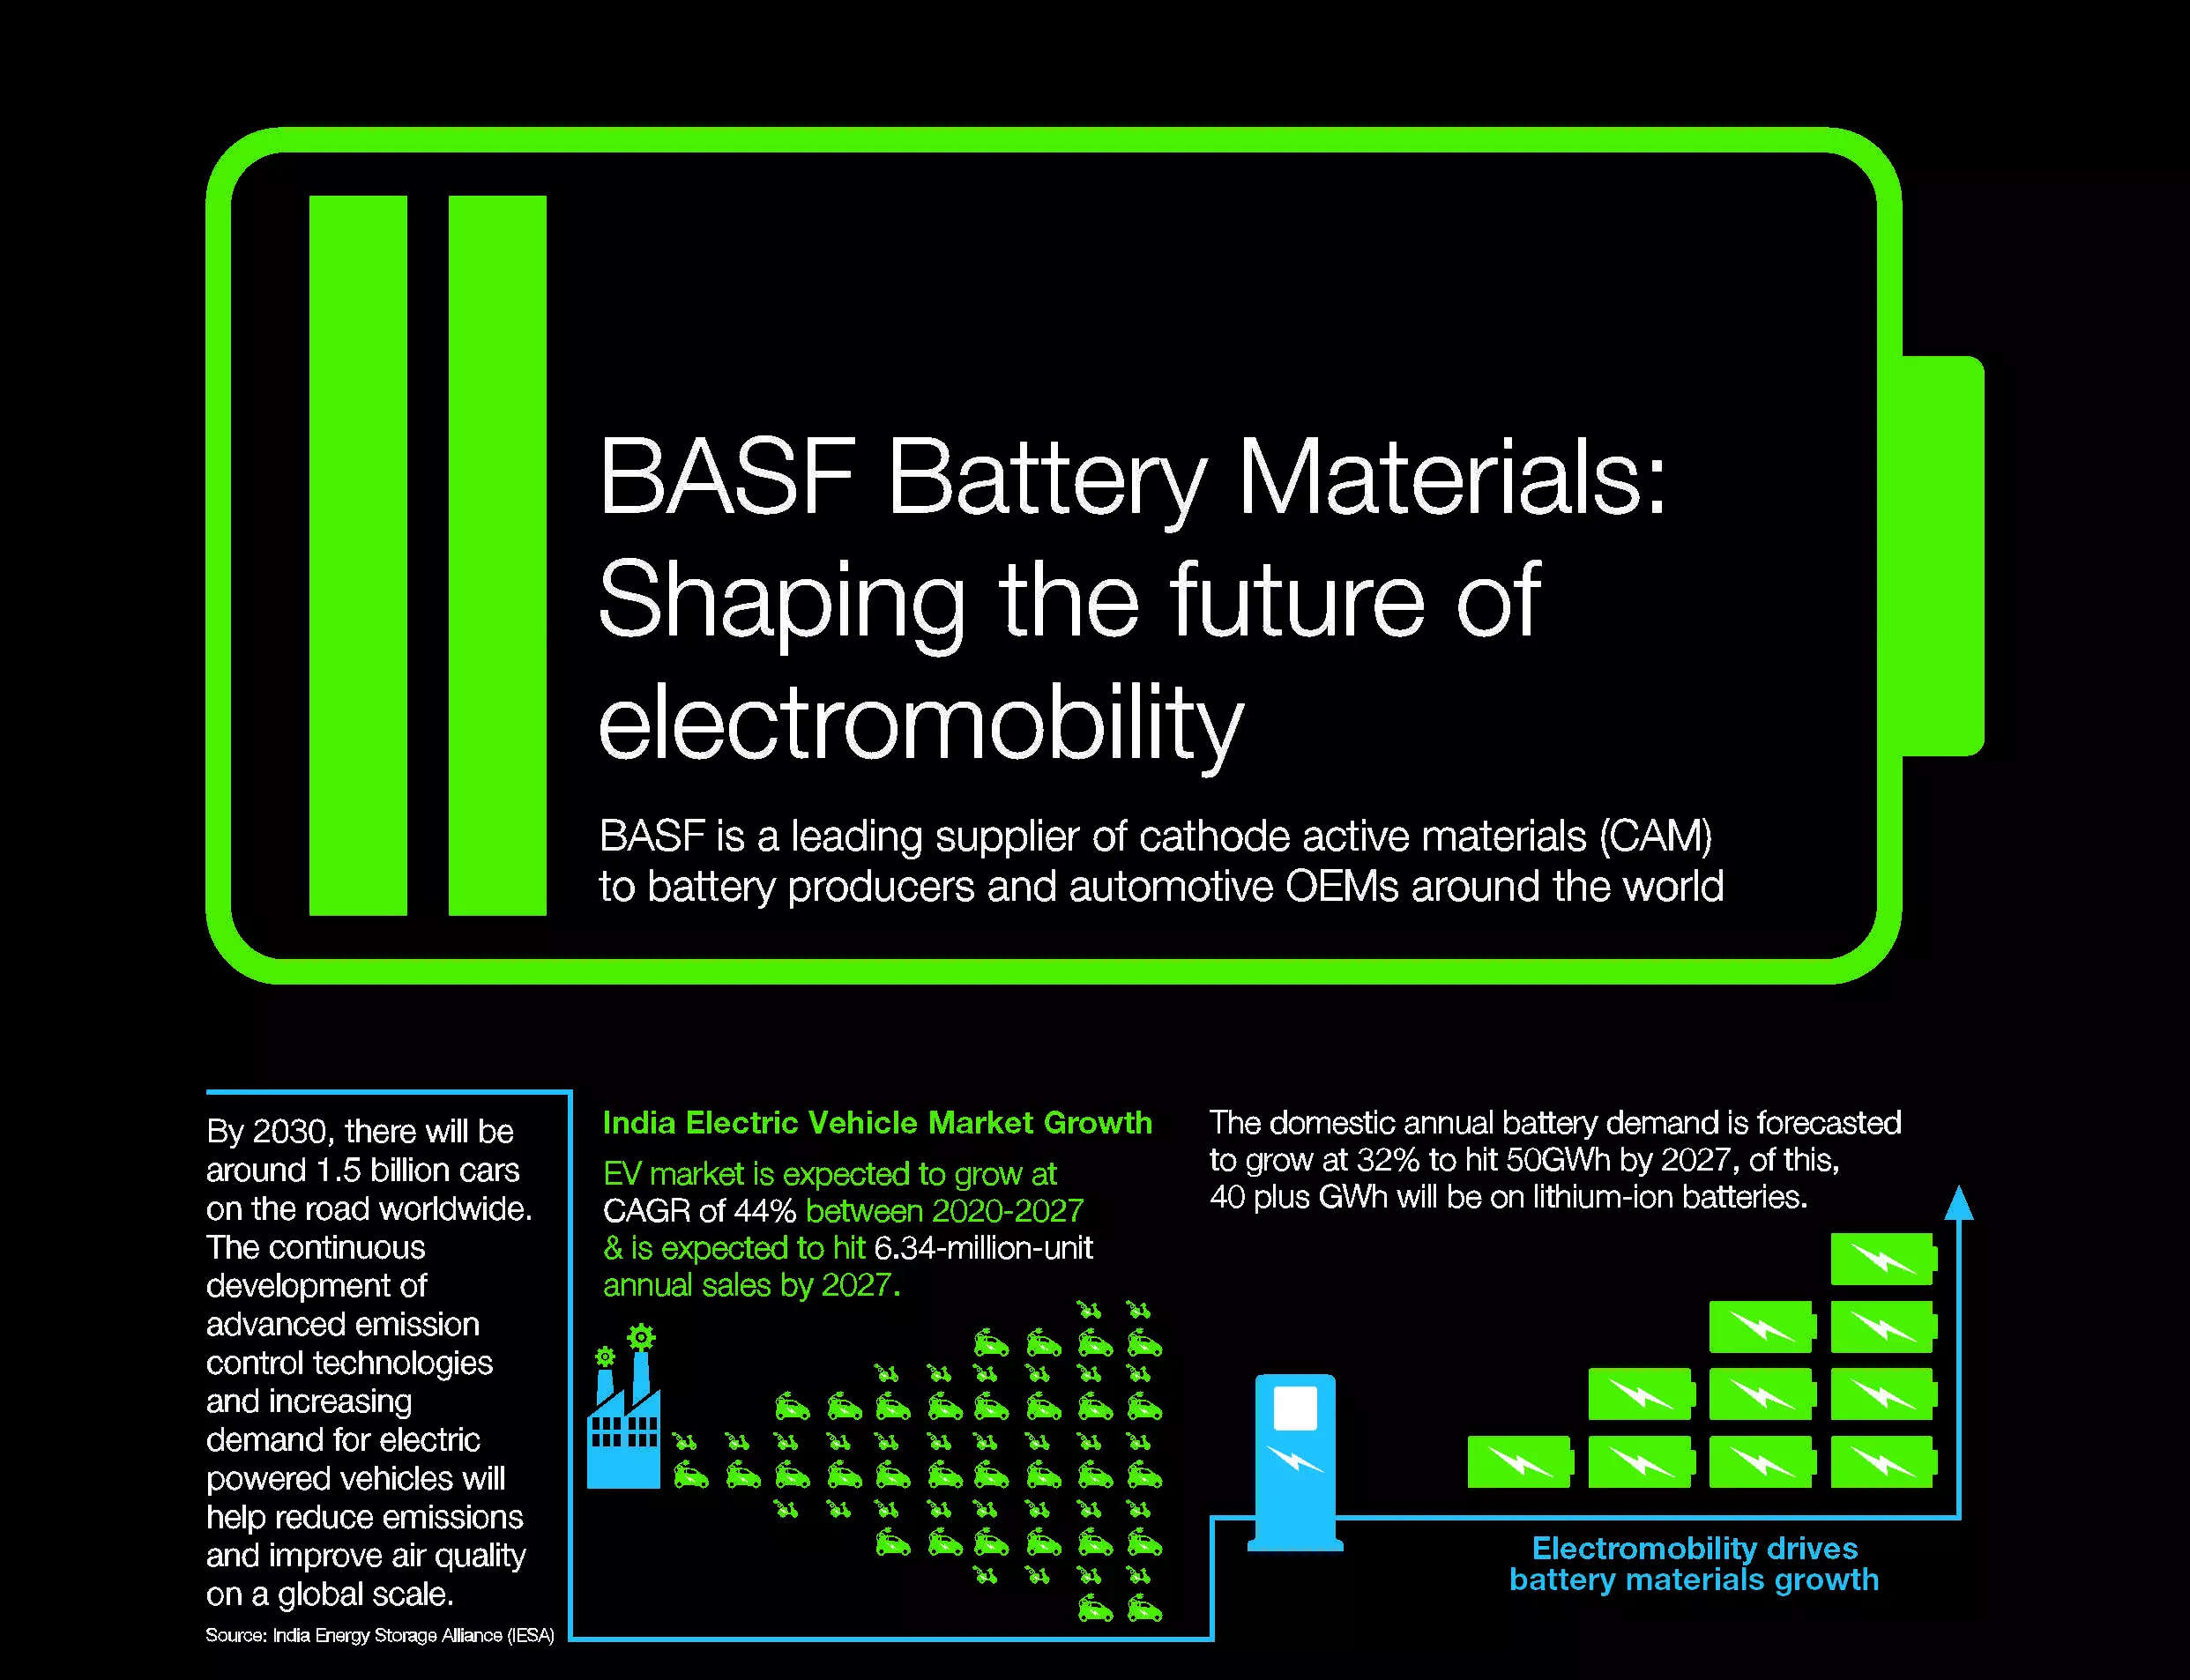 BASF Battery Materials: Shaping the future of electromobility, ET Auto